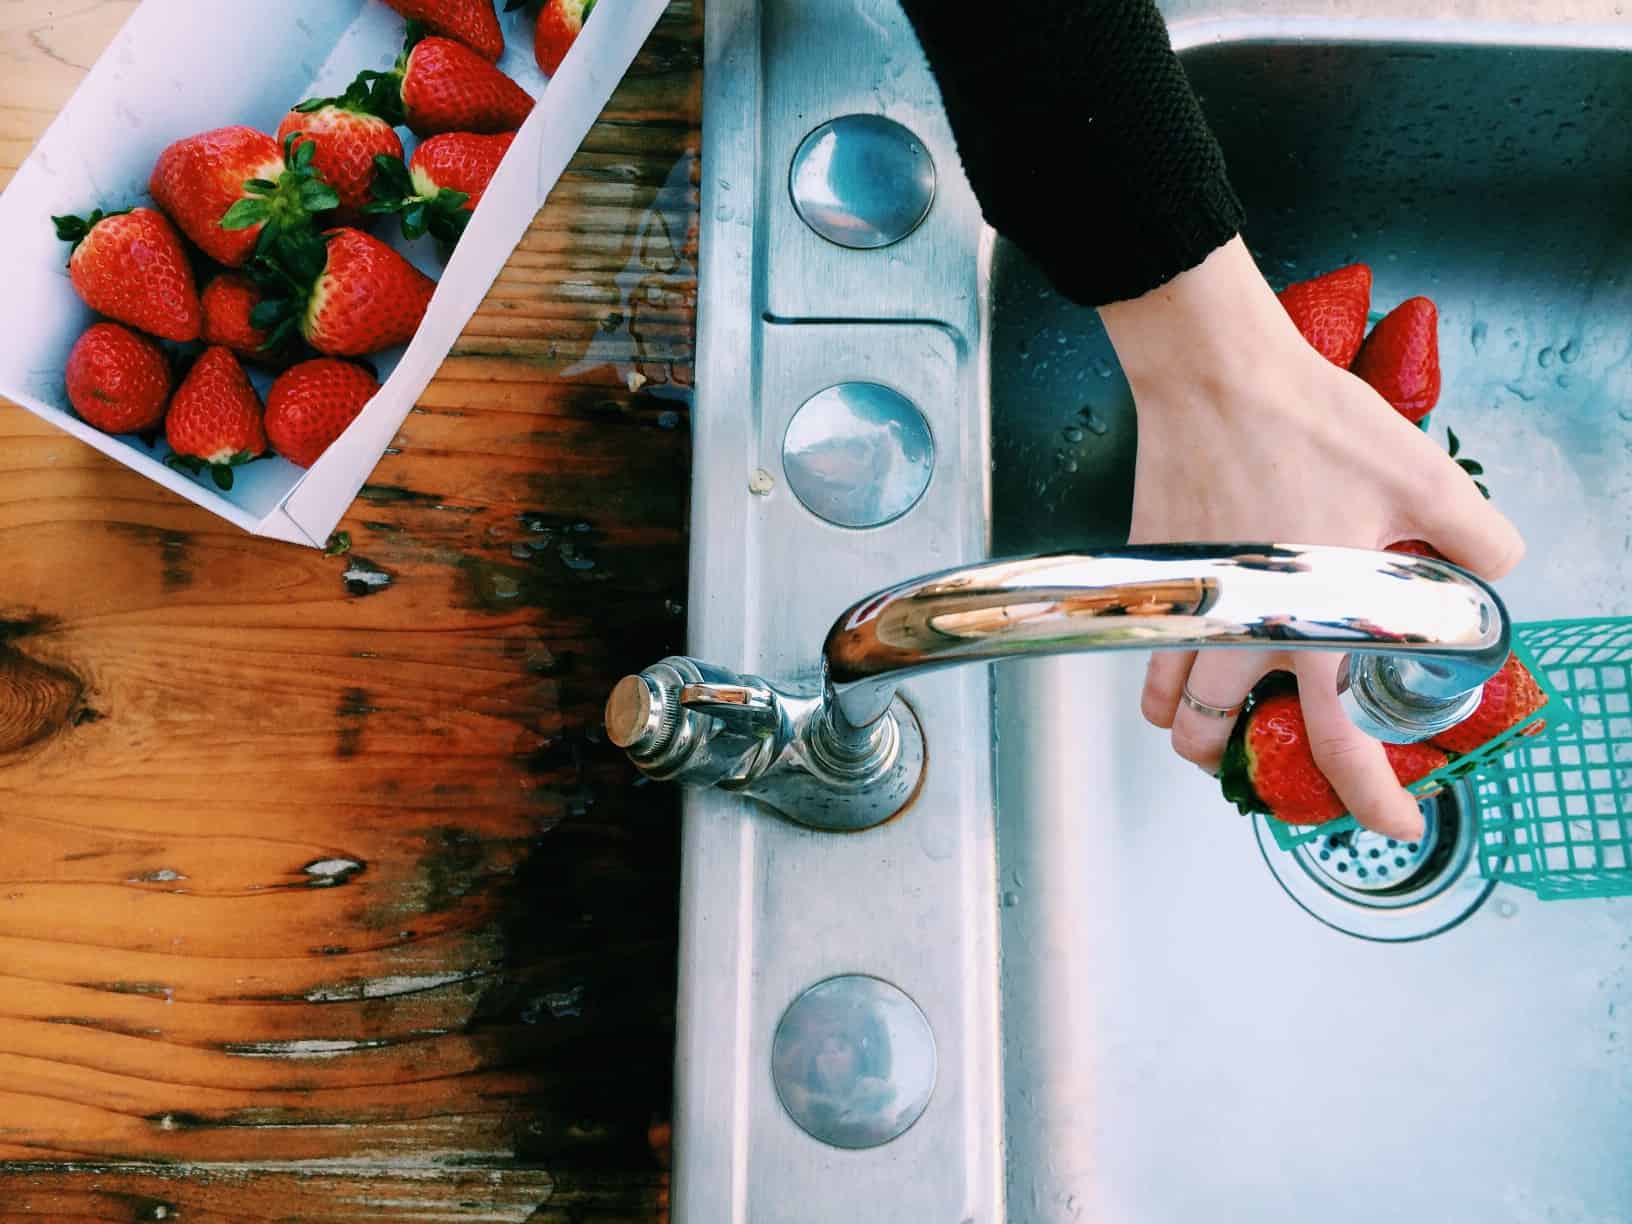 Up close of a woman's hand washing strawberries in a grey sink